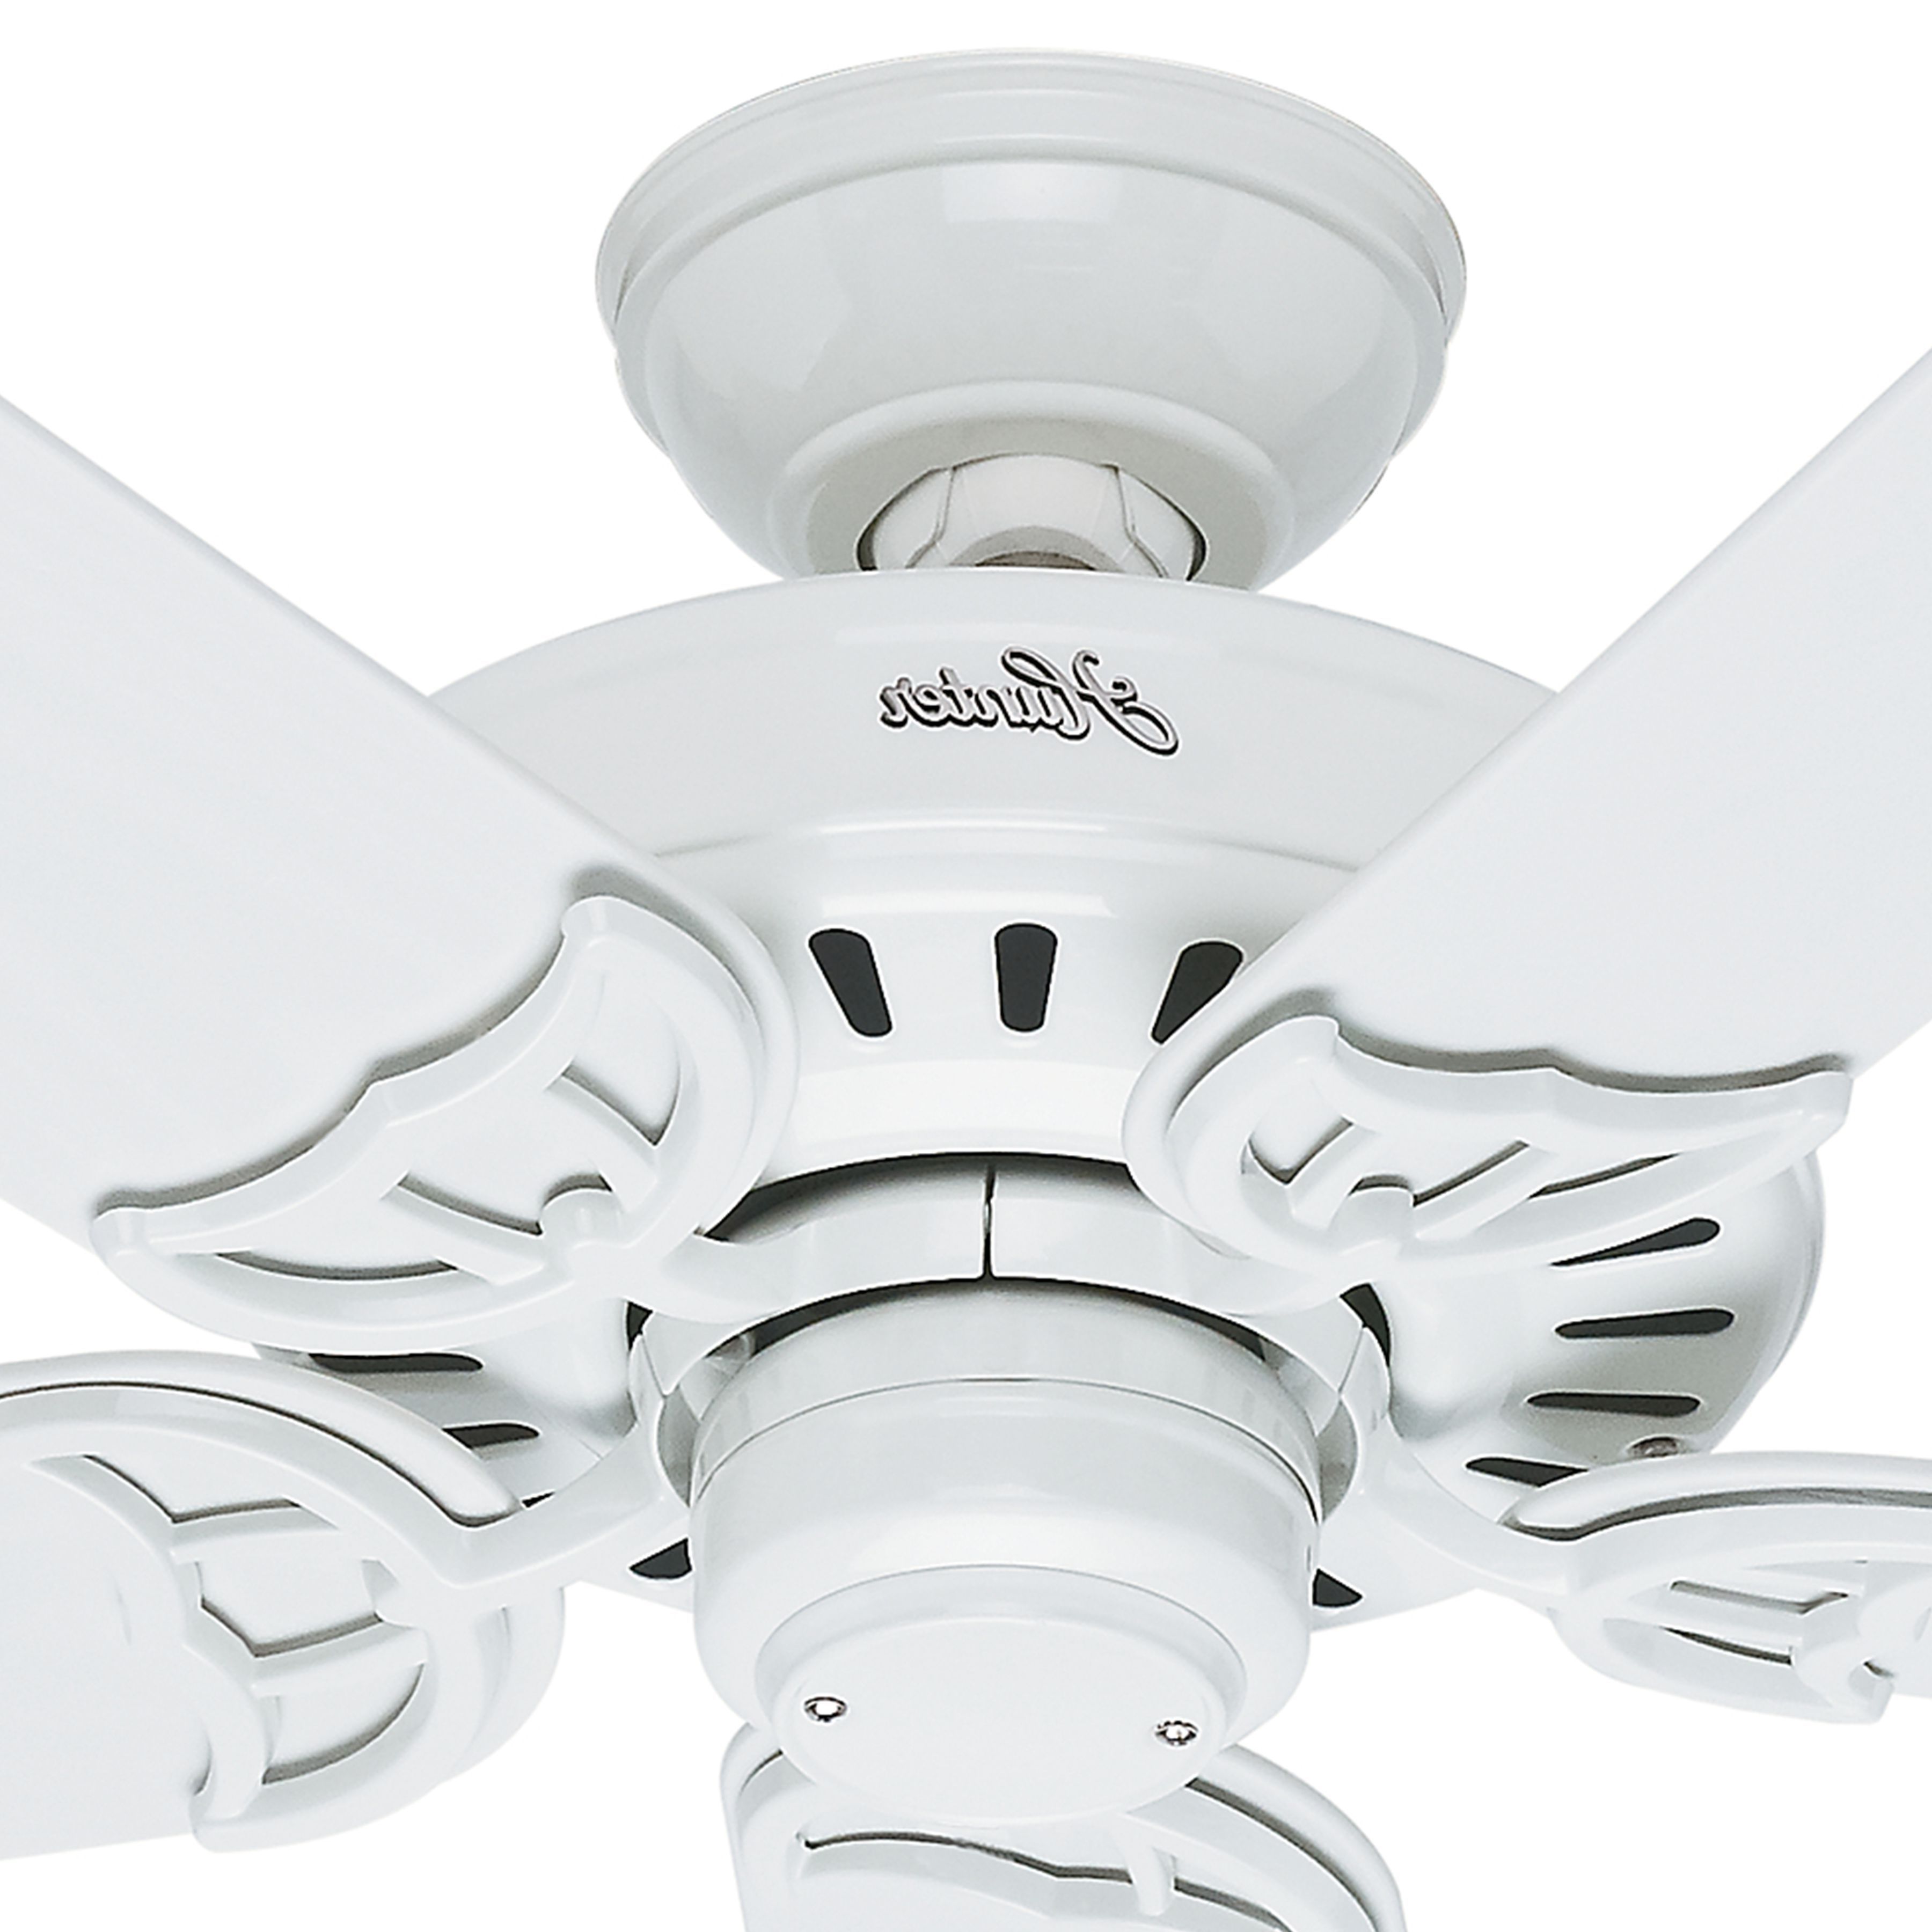 Hunter #52 #inch Outdoor White Finish #ceiling #fan Energy Star For Newest Energy Star Outdoor Ceiling Fans With Light (View 9 of 20)